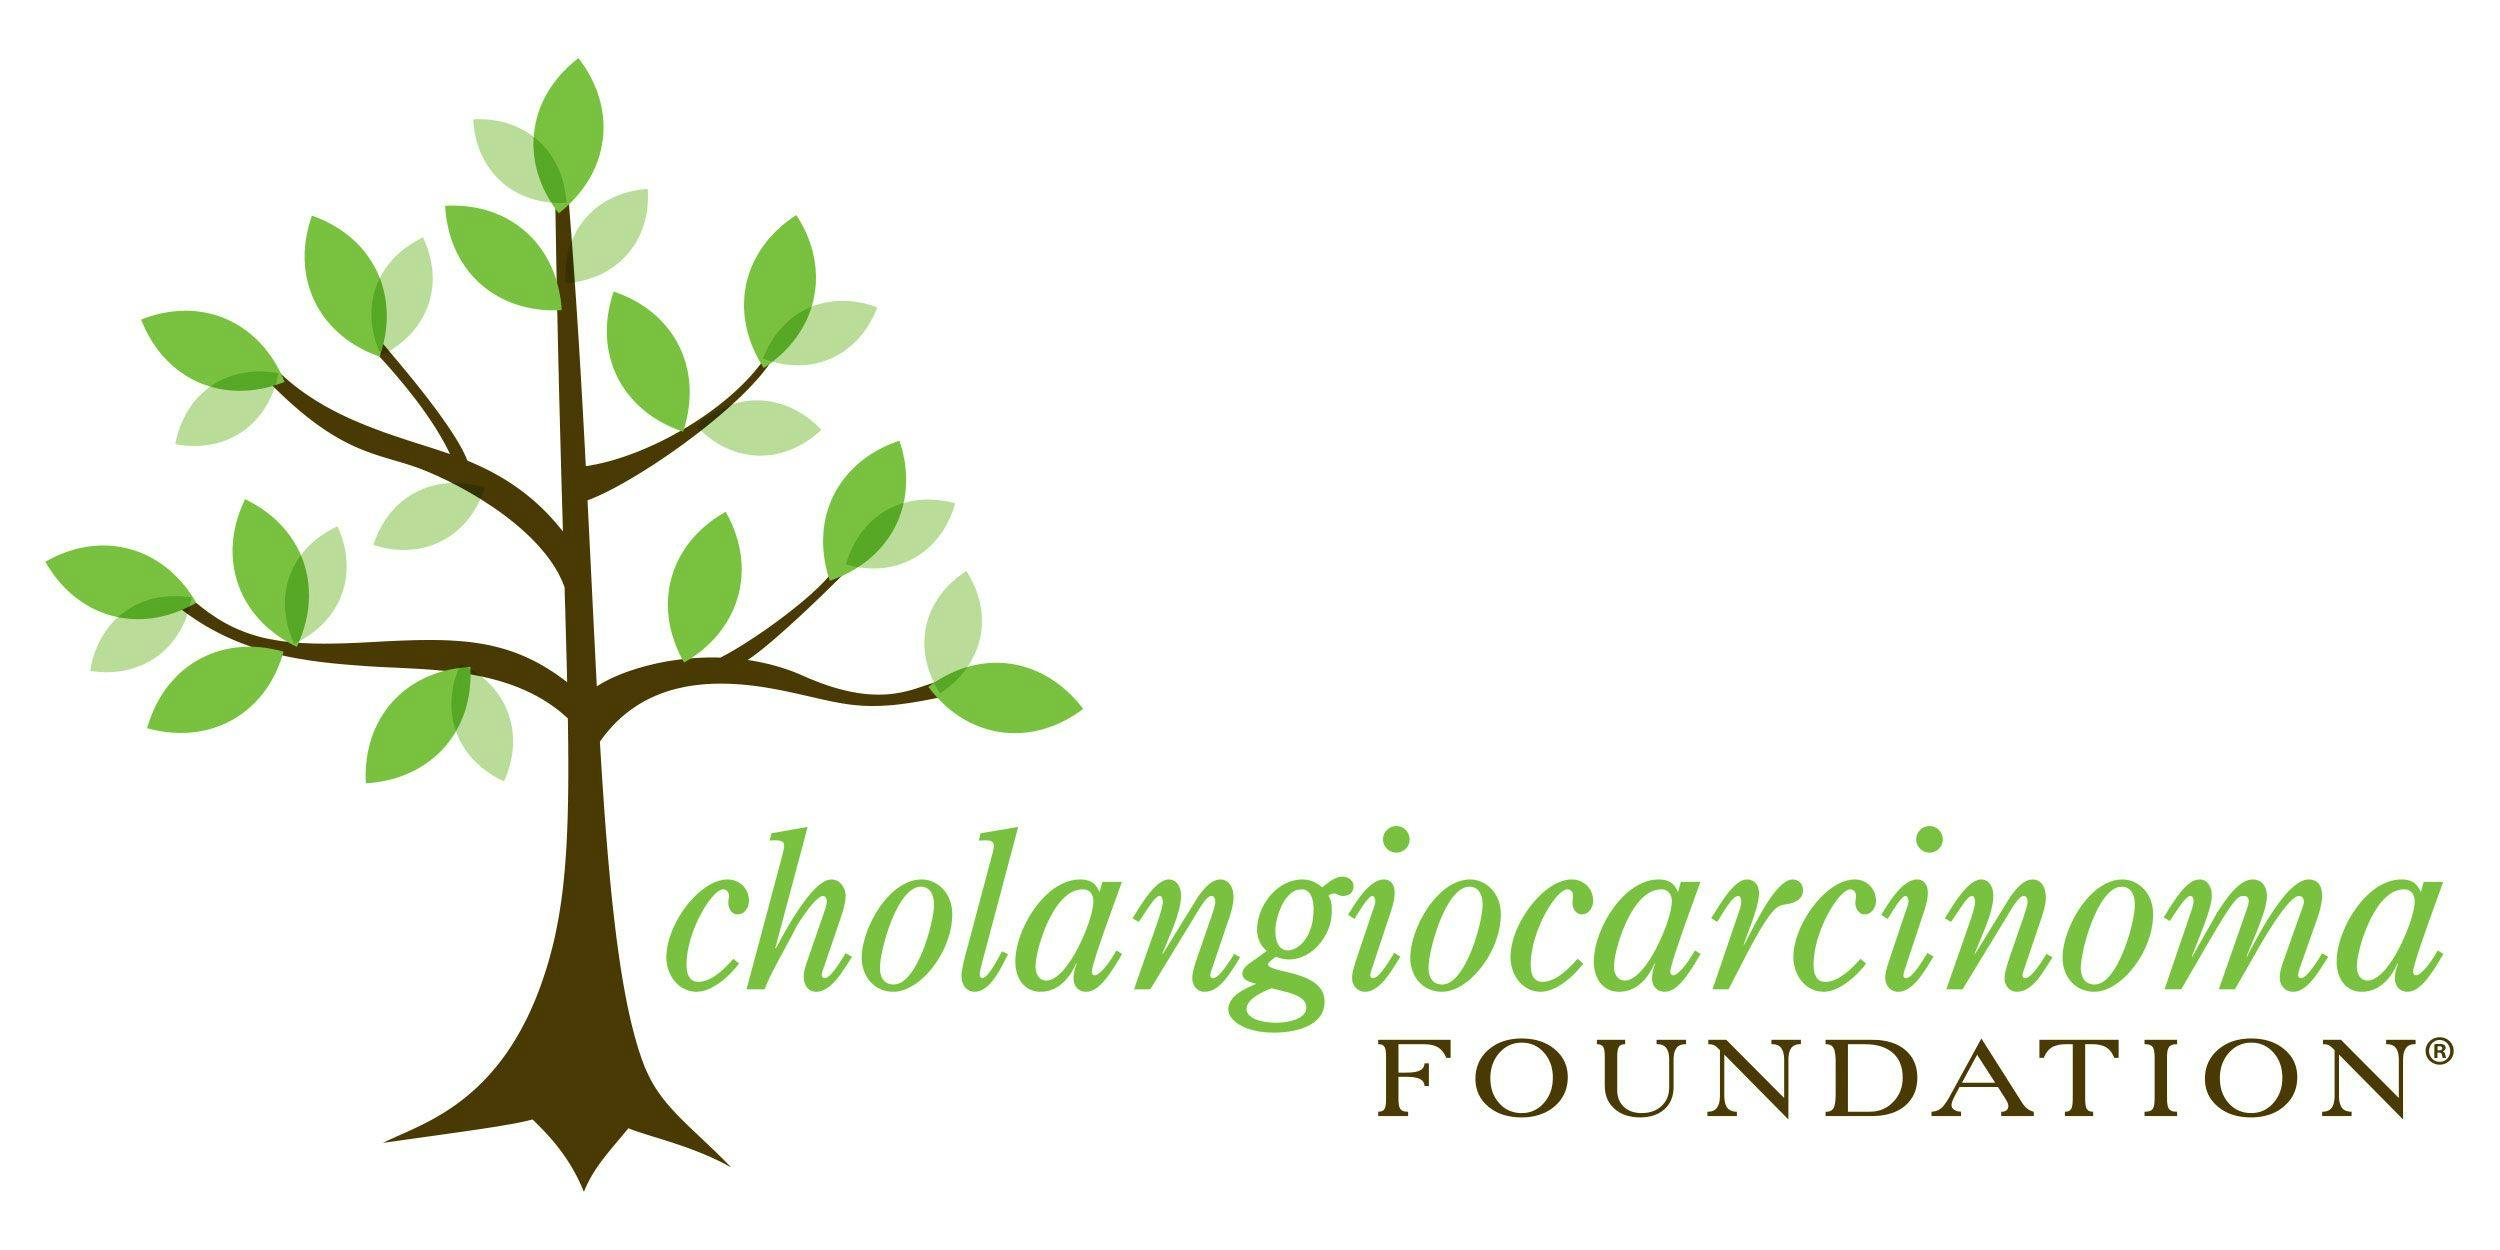 New cancer program launched by Cholangiocarcinoma Foundation to connect patients, caregivers with essential resources